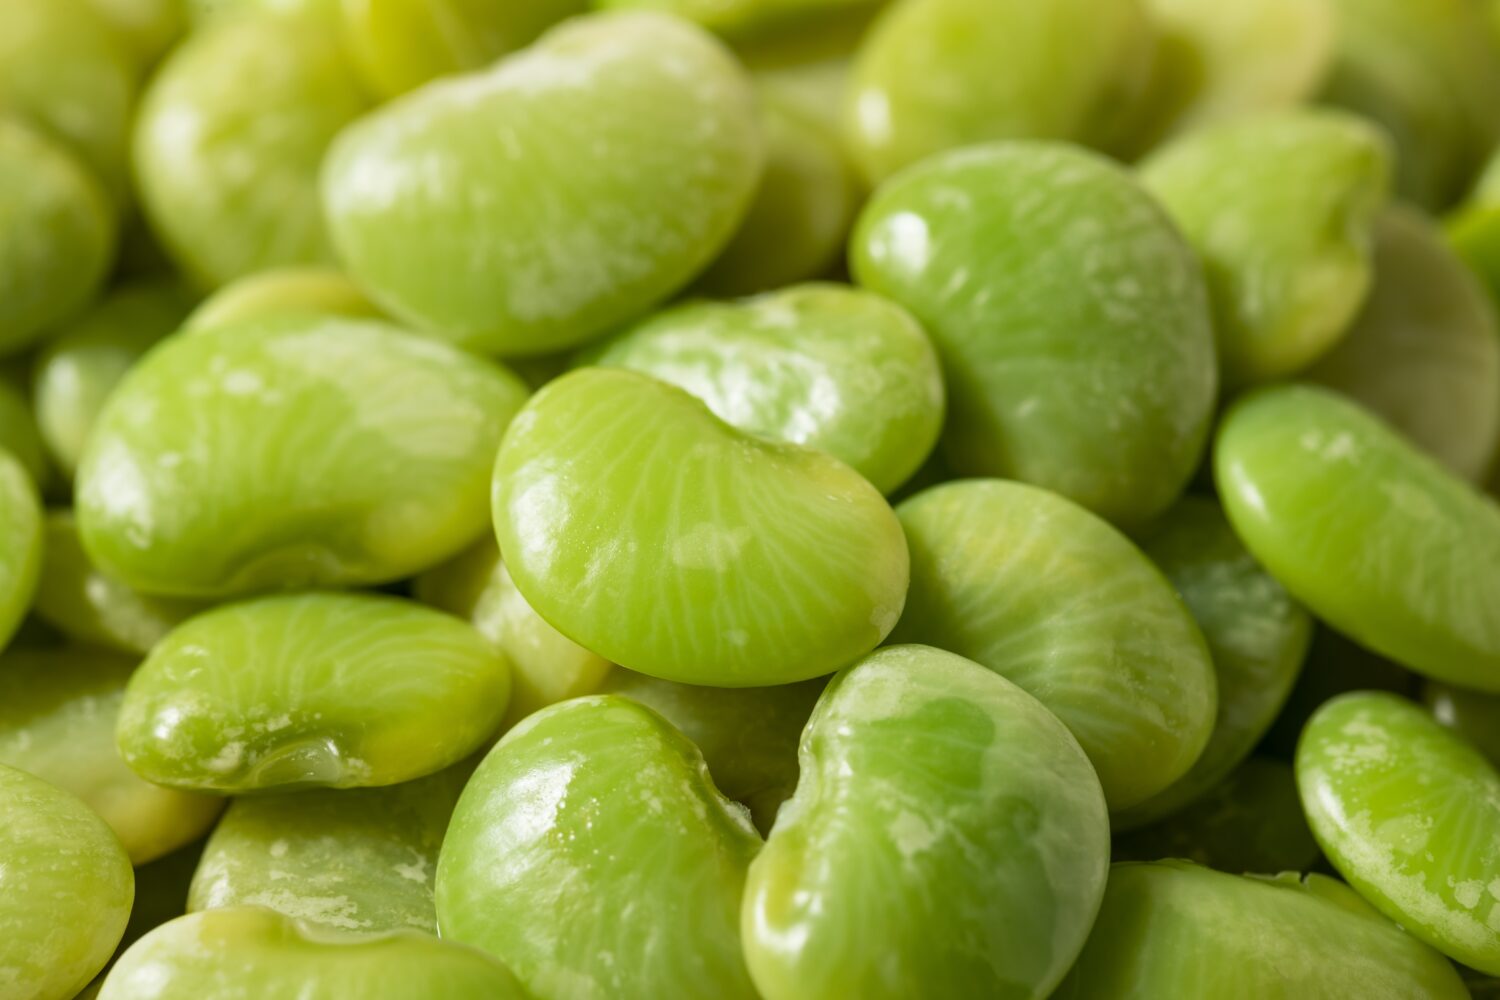 Organic Raw Steamed Green Lima Beans in a Bowl